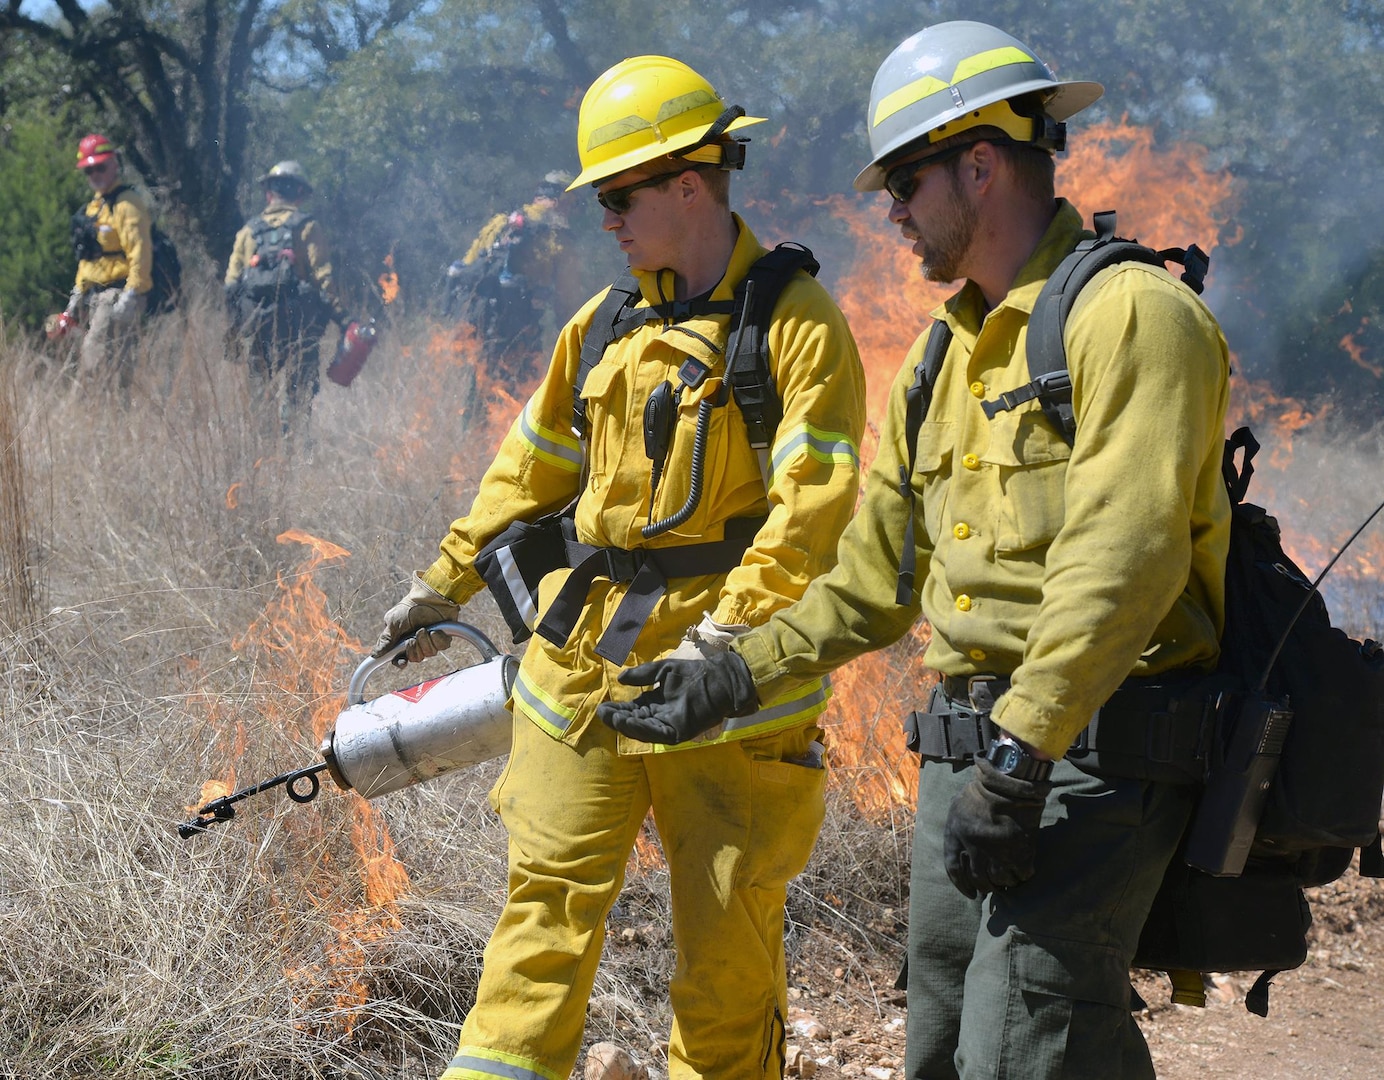 Firefighters burn vegetation at Joint Base San Antonio-Camp Bullis during a controlled burn Feb. 23. Firefighters burned nore than 600 acres of vegetation at the installation during a three-day period from Feb. 22-24, in an effort to prevent wildfires from occurring. The controlled burn was a joint effort between the 502nd Civil Engineering Squadron at JBSA, the U.S. Fish and Wildlife Service, JBSA Fire Emergency Services and area firefighters. 